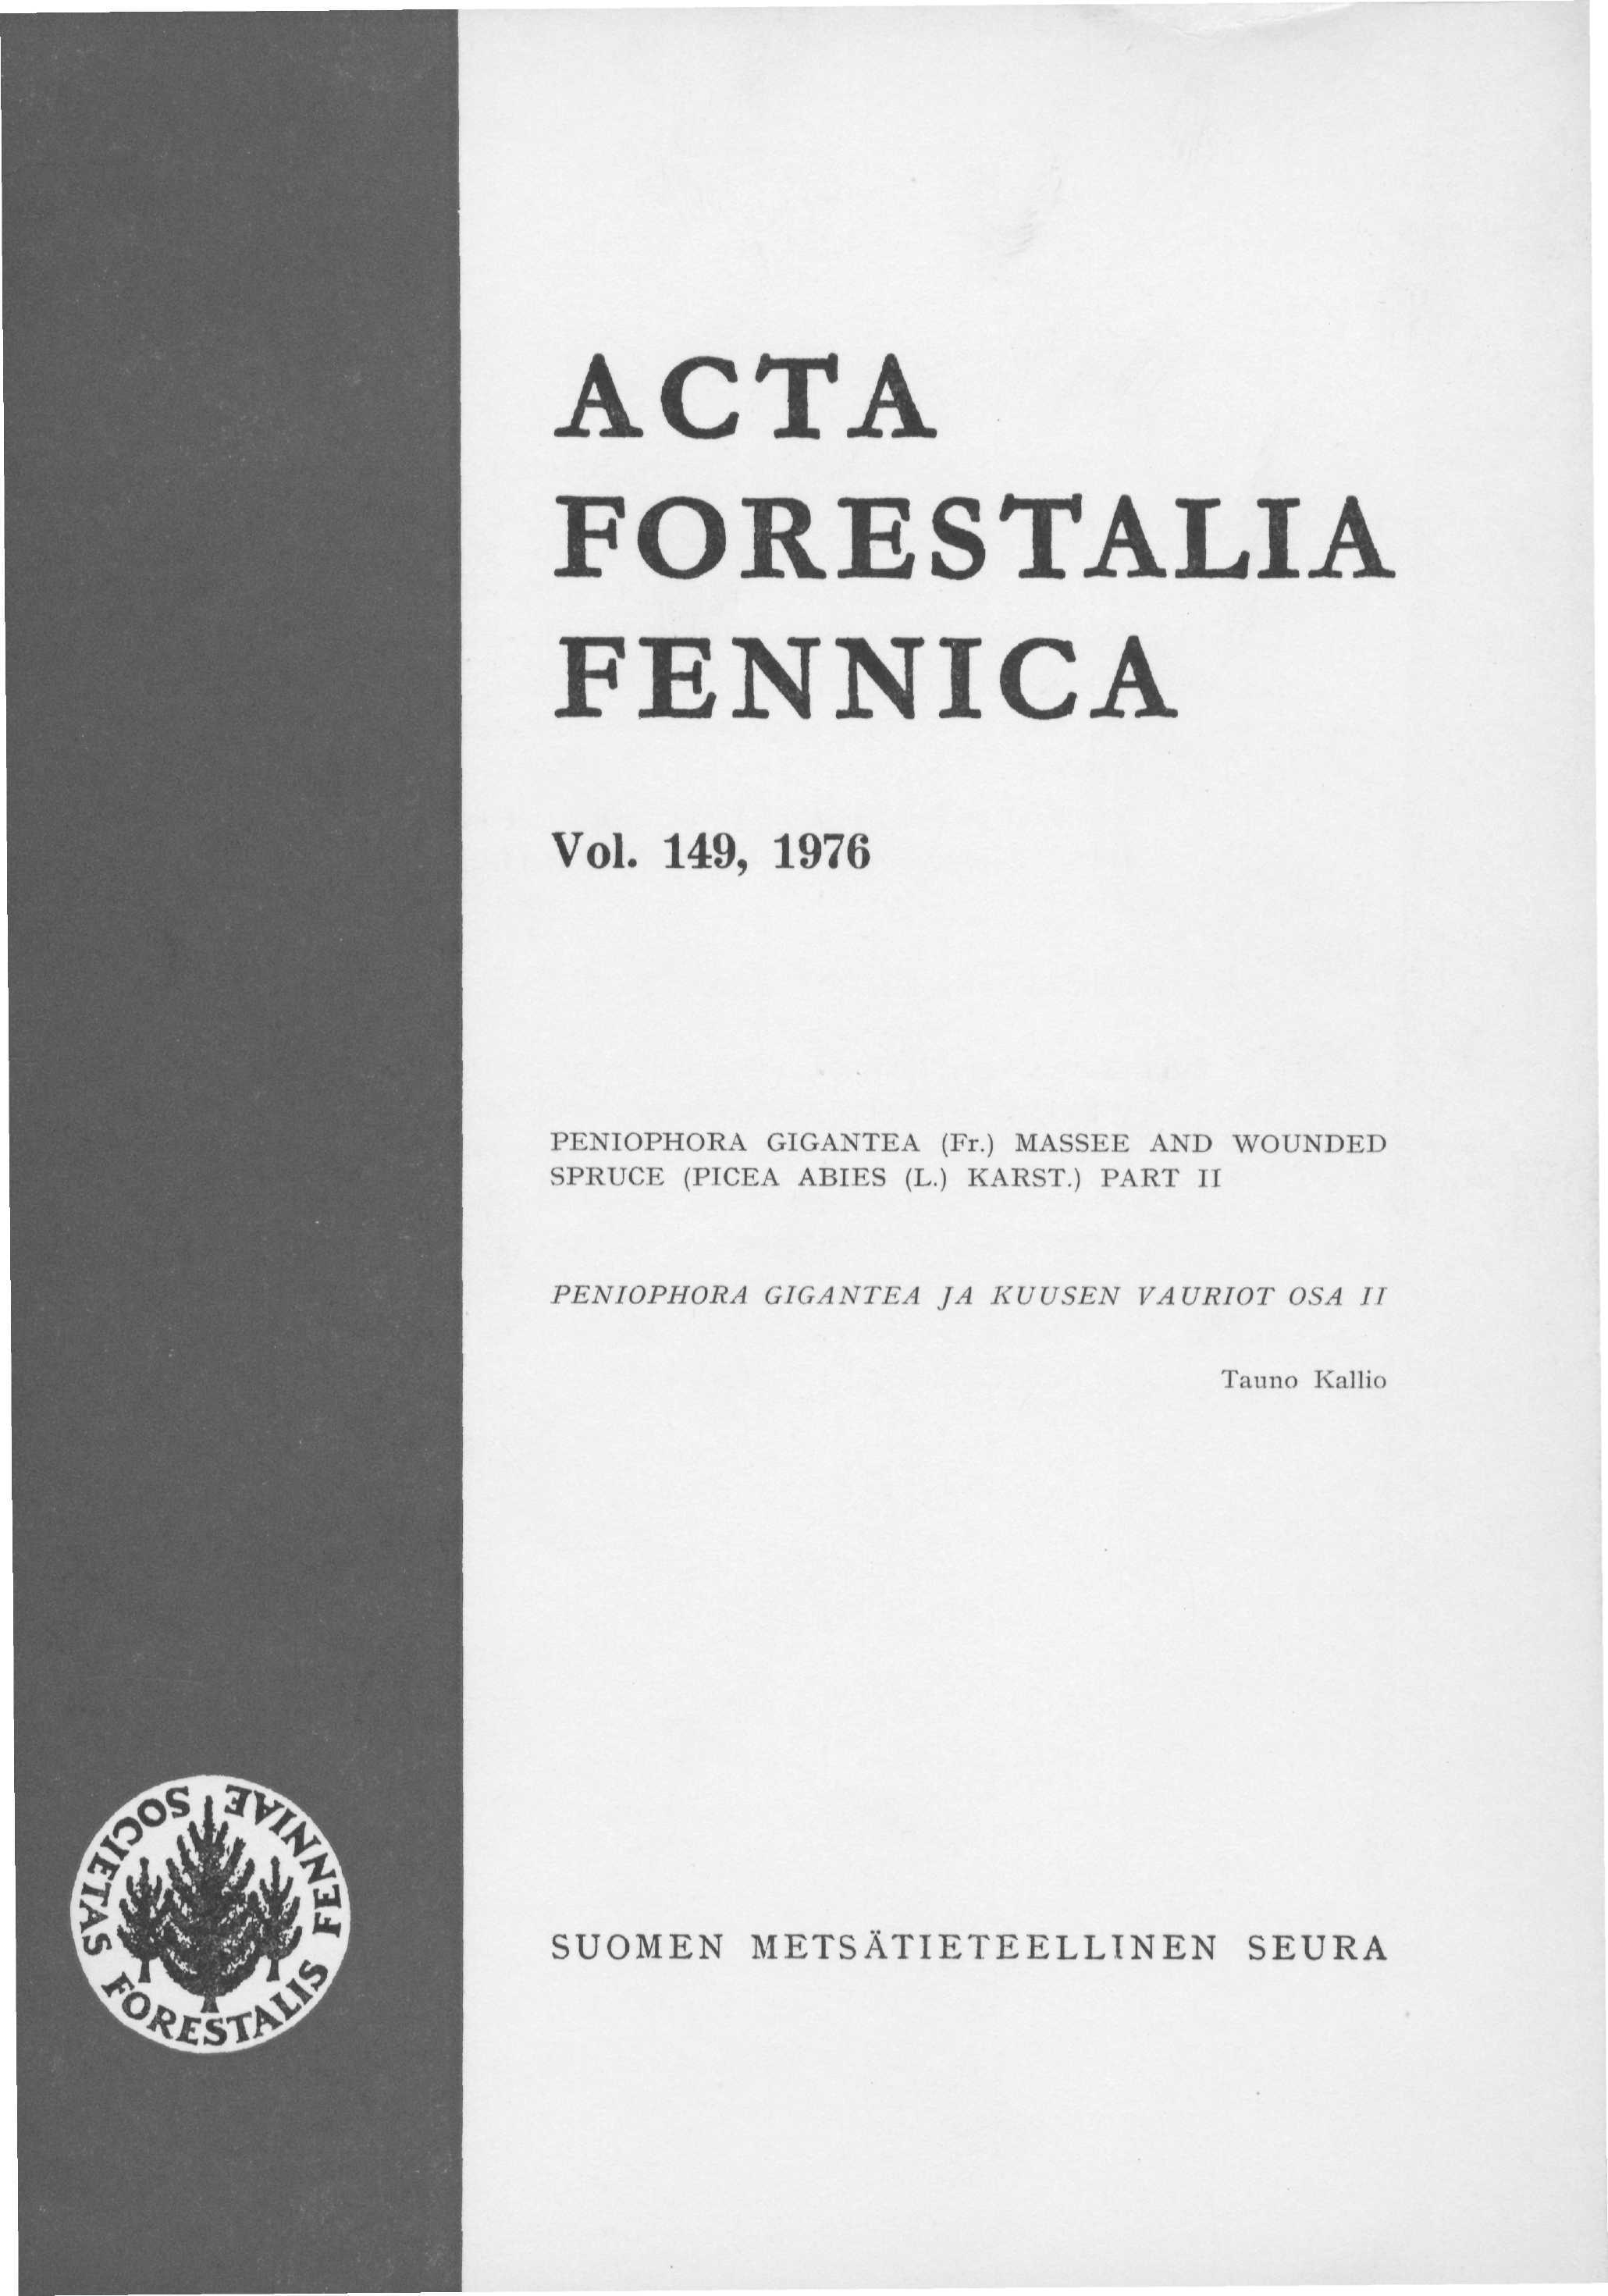 ACTA FORESTALIA FENNICA Voi. 49, 976 PENIOPHORA GIGANTEA (Fr.) MASSEE AND WOUNDED SPRUCE (PICEA ABIES (L.